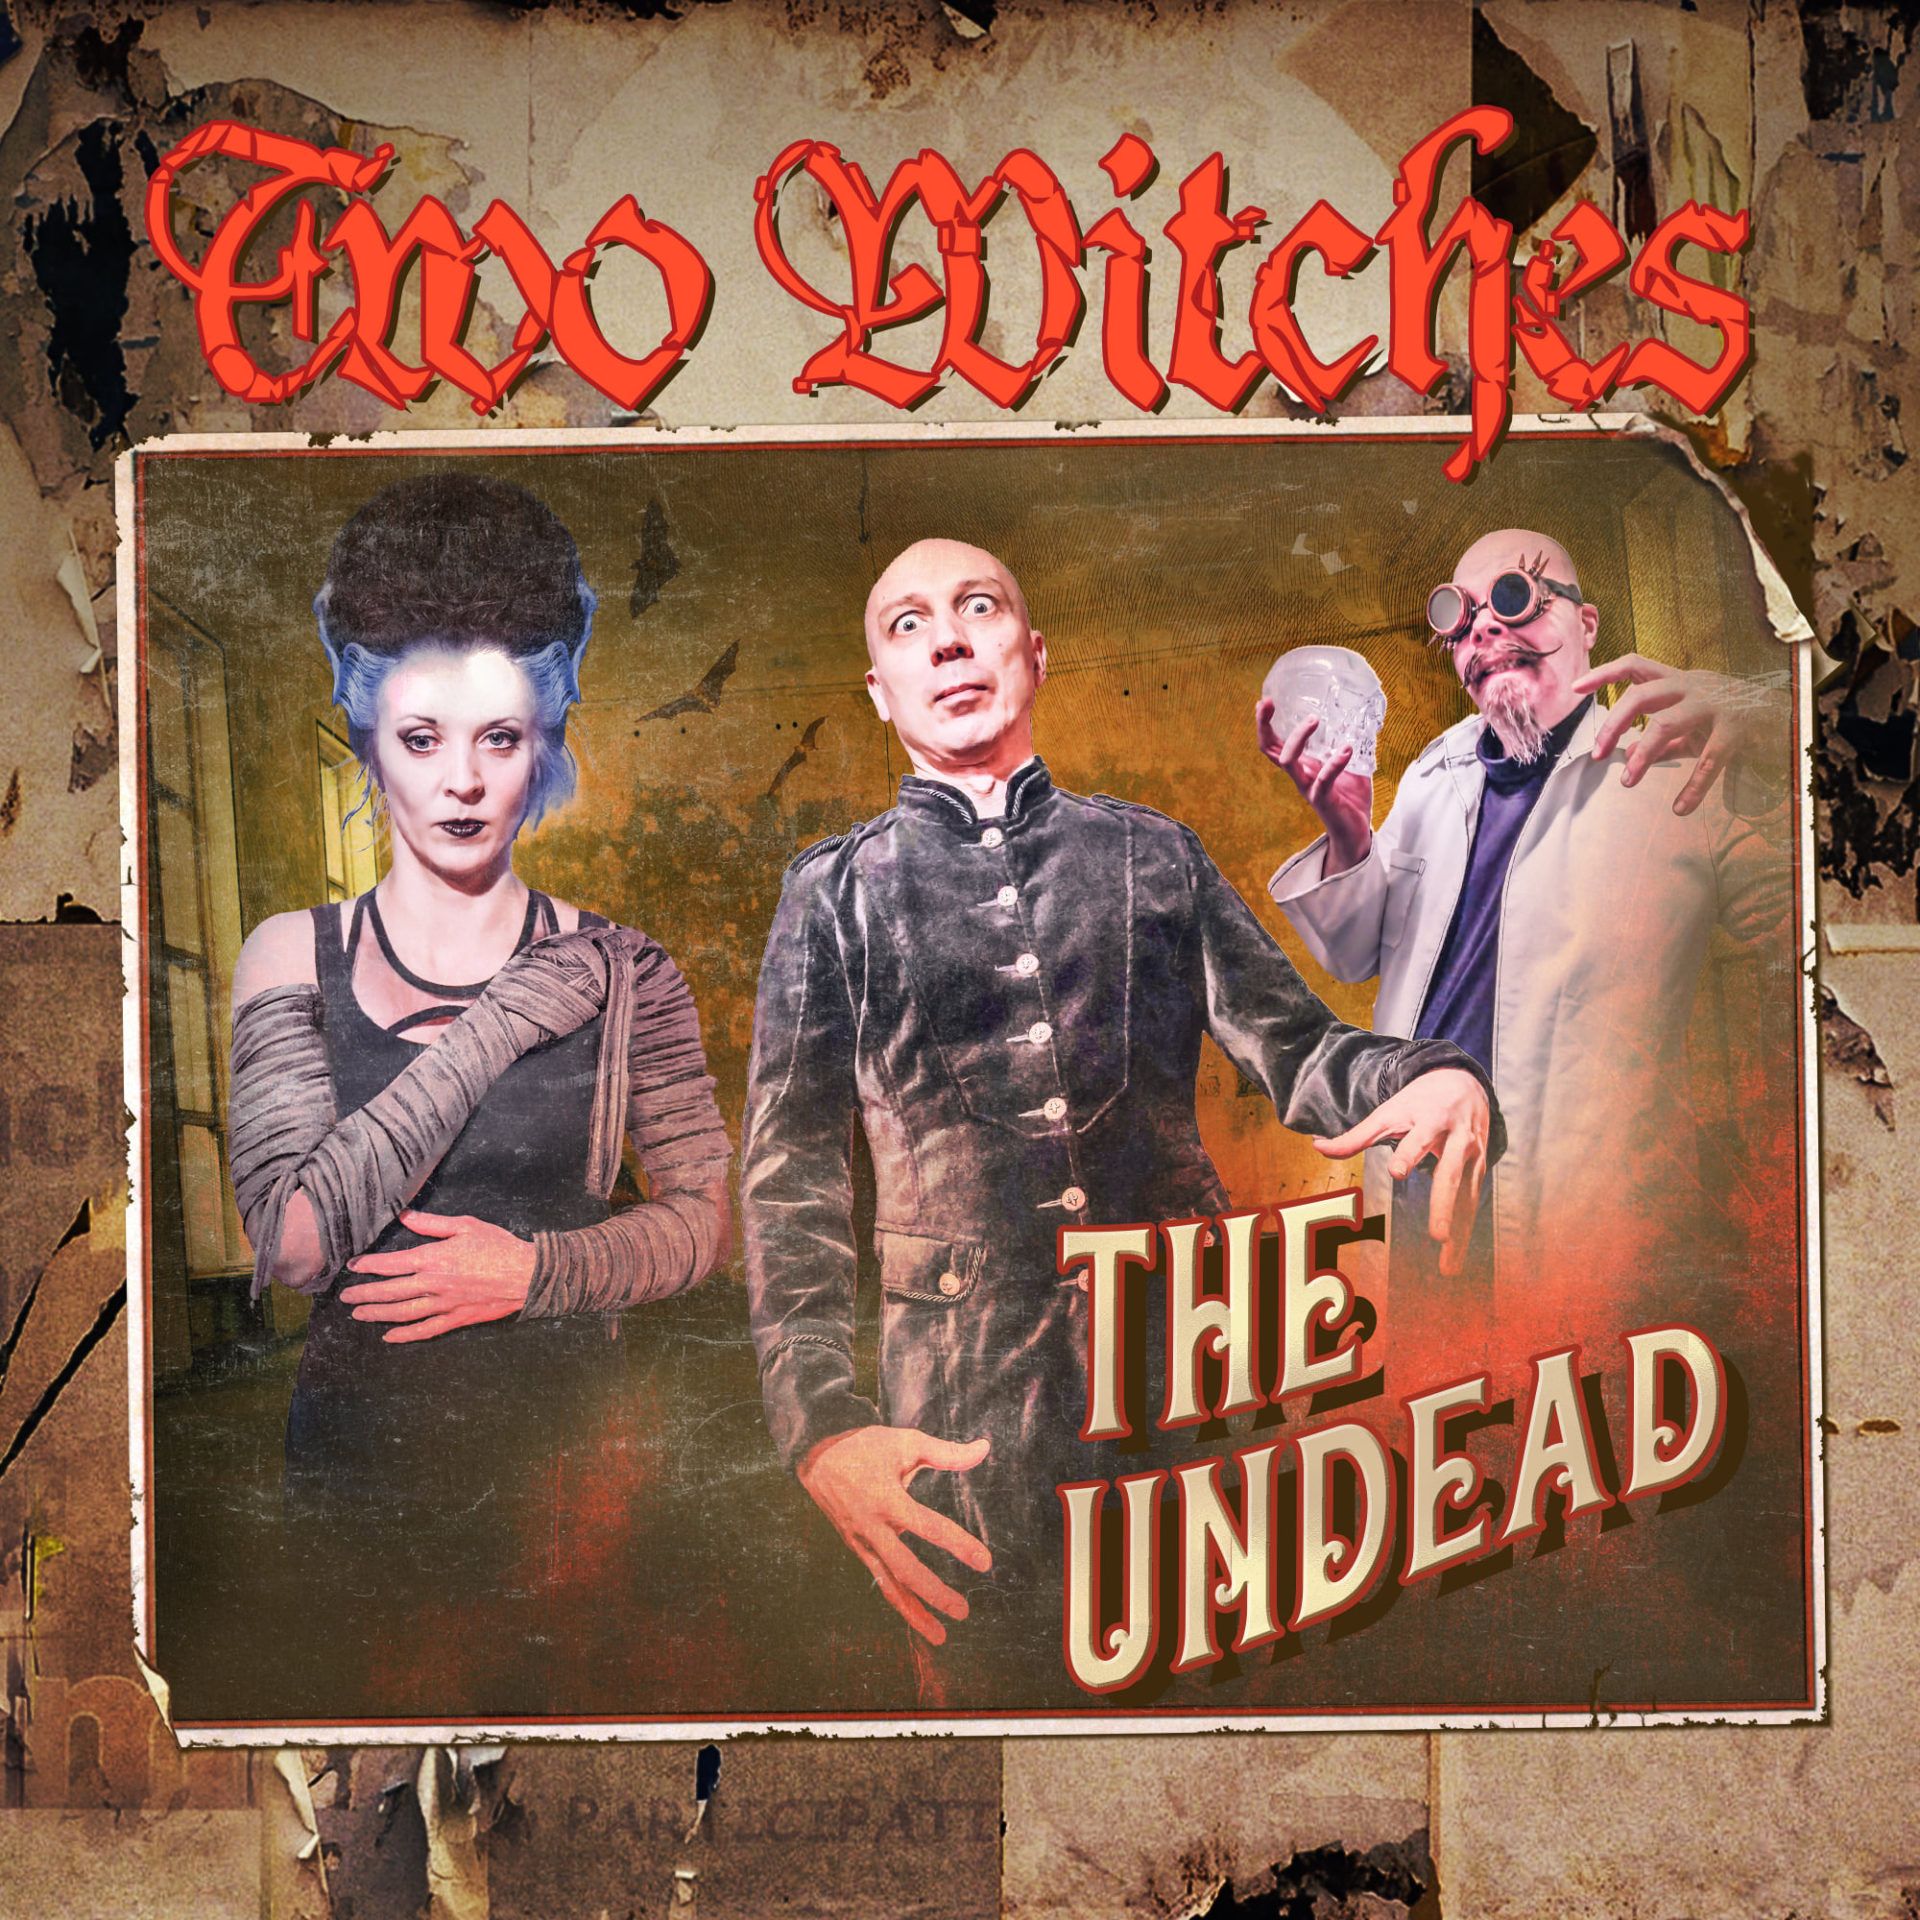 TWO WITCHES: The Undead – the new studio album